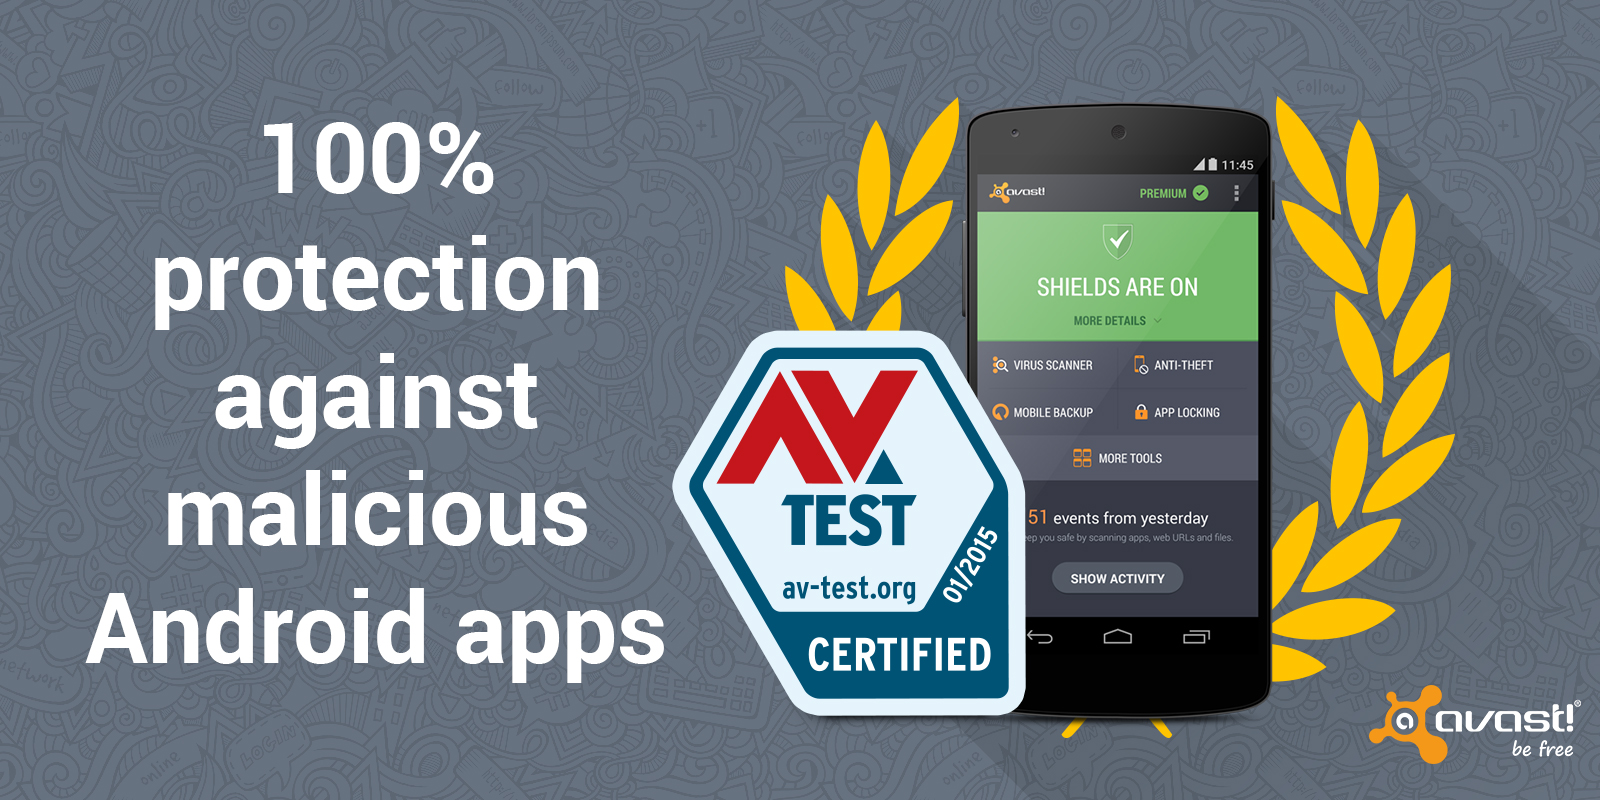 Avast Mobile Security gives Android users 100% protection against malicious apps.